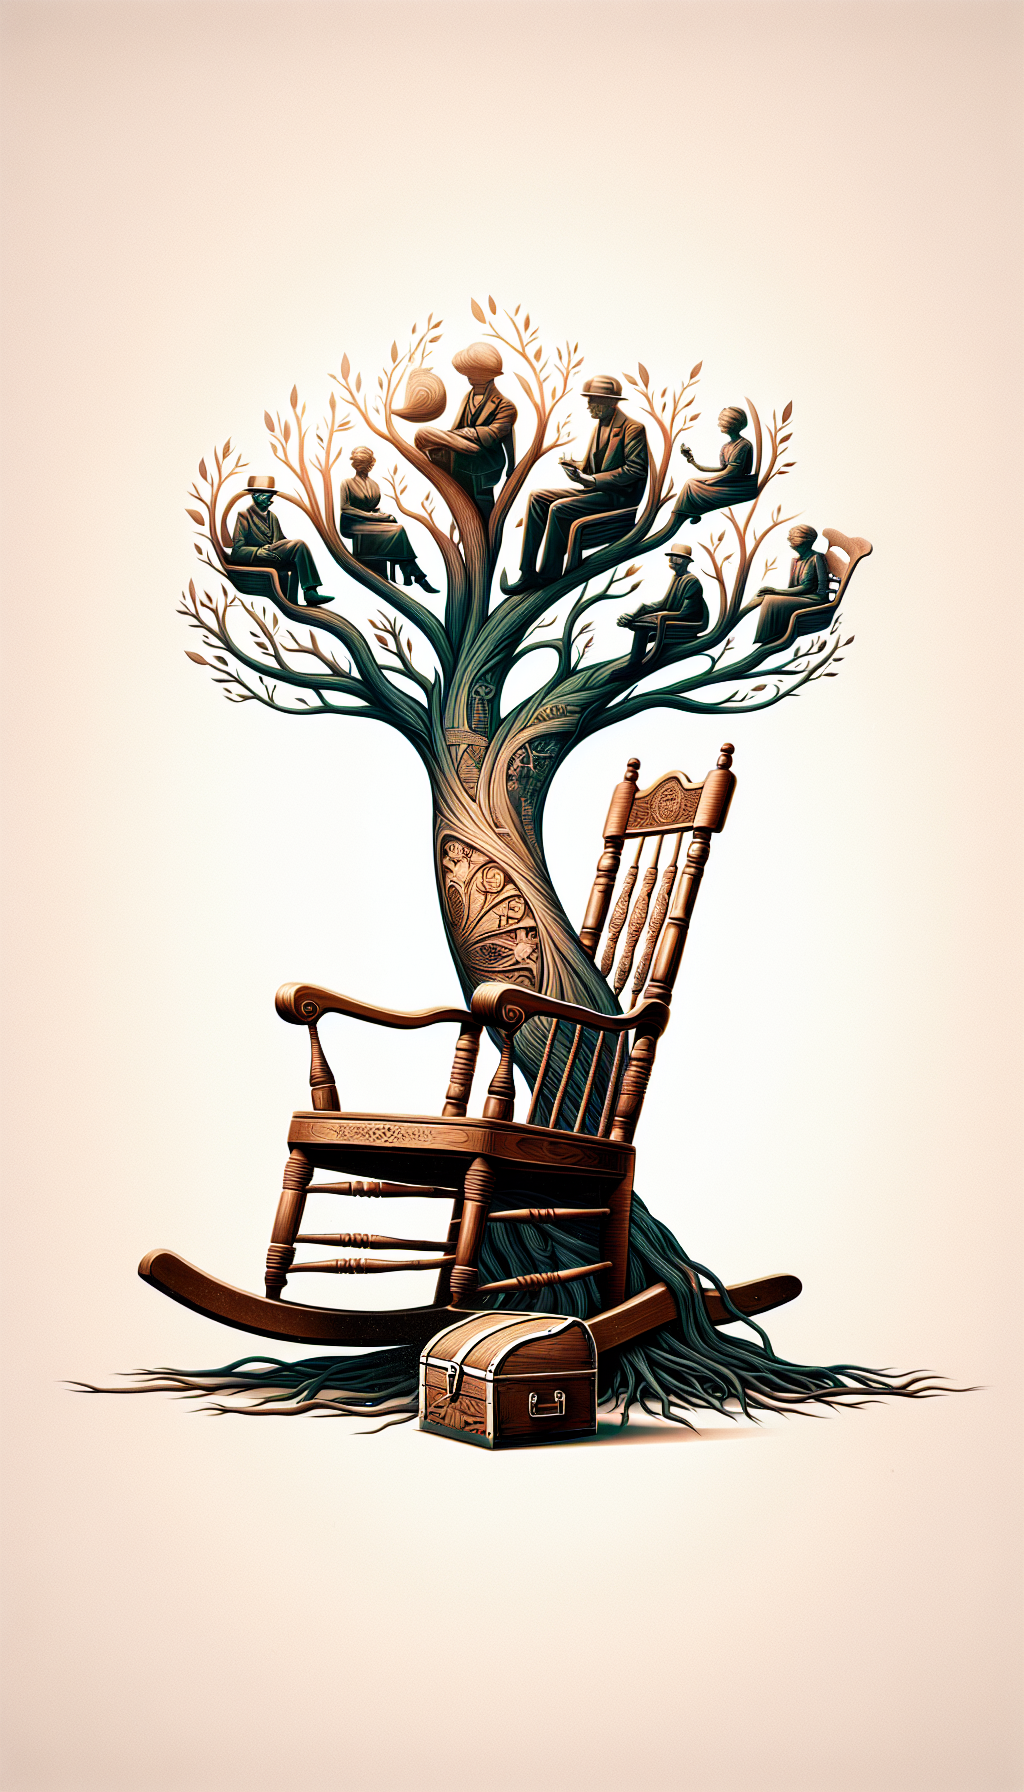 An elegant, vintage rocking chair stands at the forefront, its wood grain rich with age. Behind it, a transparent, ancestral tree grows from the seat, with notable historical figures perched on its branches, each holding a prized possession. The tree's roots delve into a treasure chest below, symbolizing the chair's storied past enhancing its value.